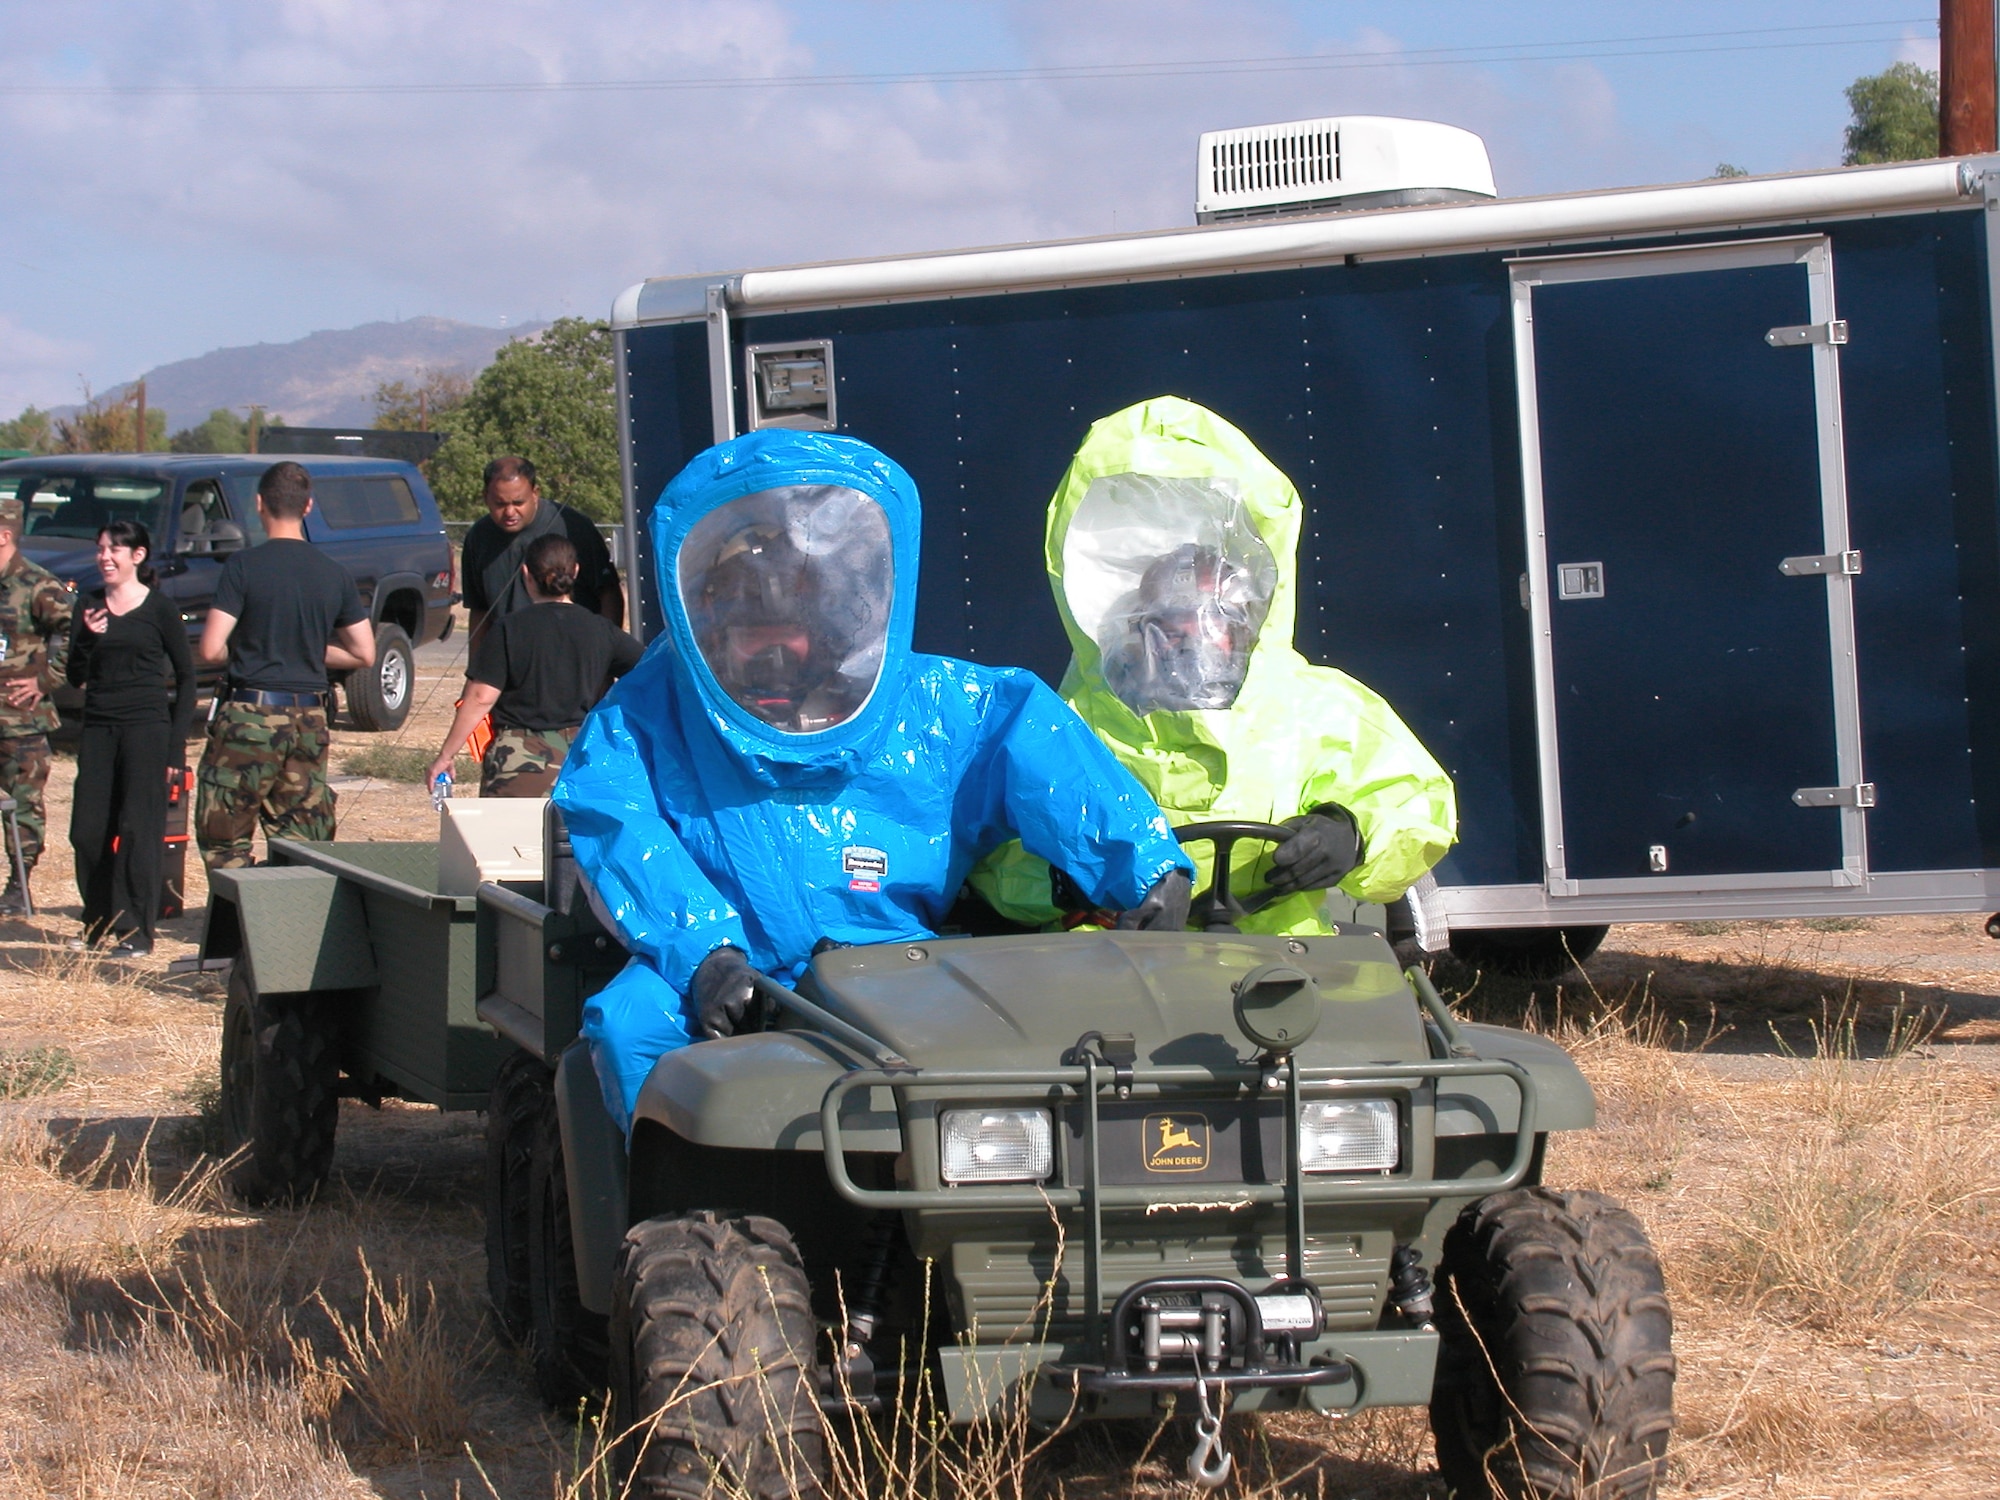 Master Sgt. Marc Haraksin, 163 RW (left) and Senior Airman Chris Valenzano, 163 EM Flight, drive to the suspected lab site to test the perimeter and establish proper zones for the off-scene command section. (U.S Air Force photo by Senior Airman Kara McGrath)